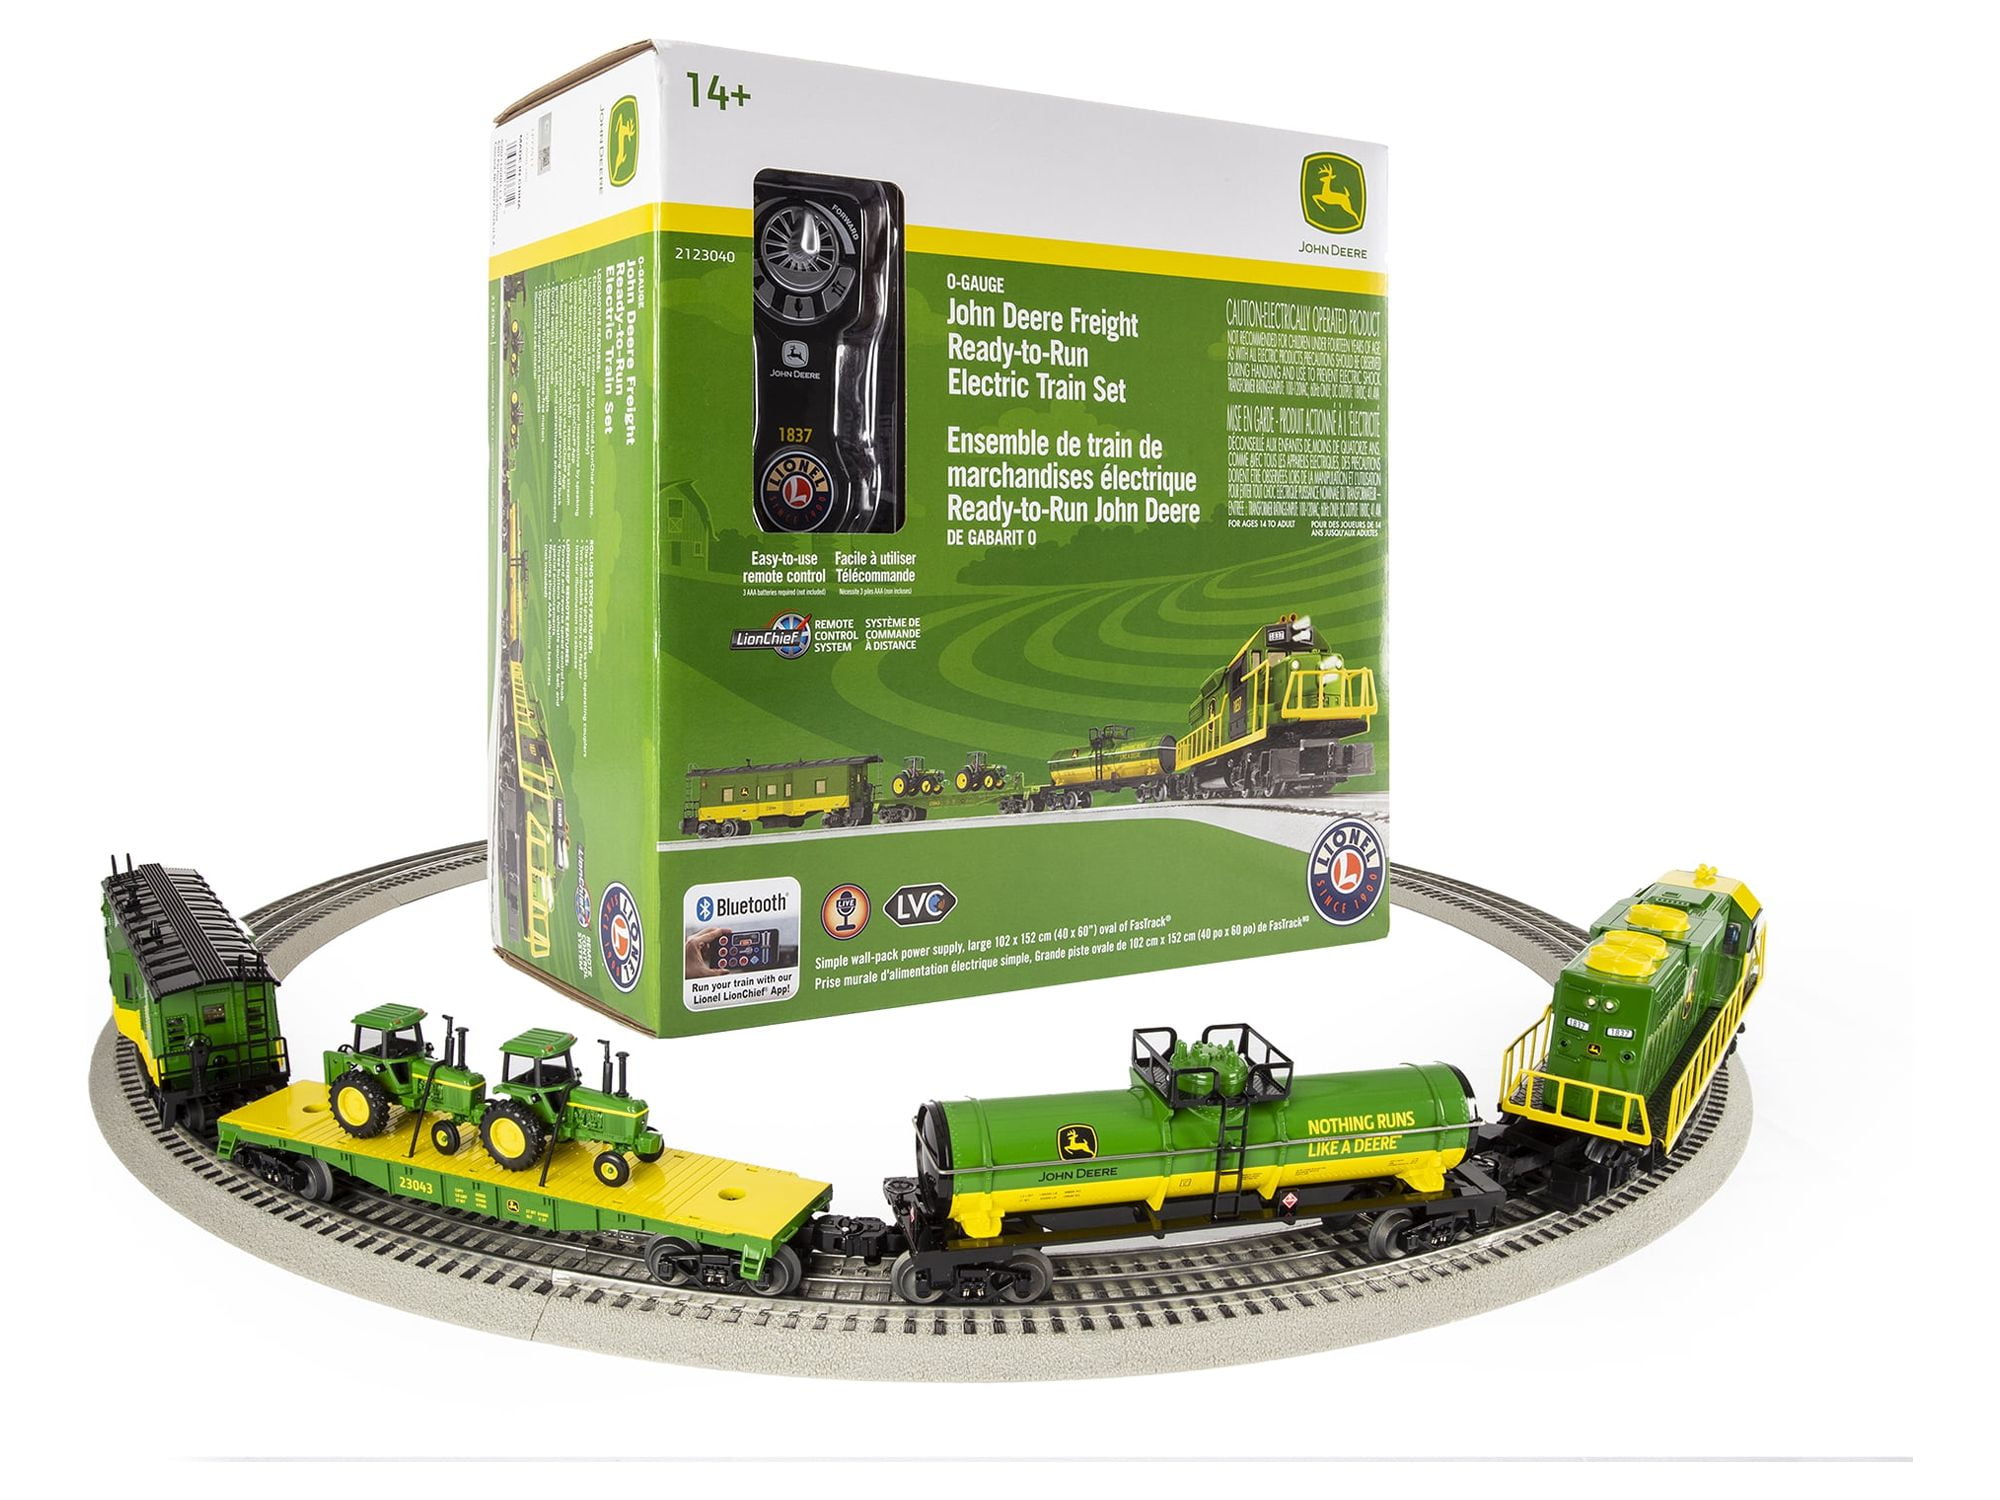 Lionel John Deere Freight Electric O Gauge Train Set with Remote and  Bluetooth 5.0 Capability